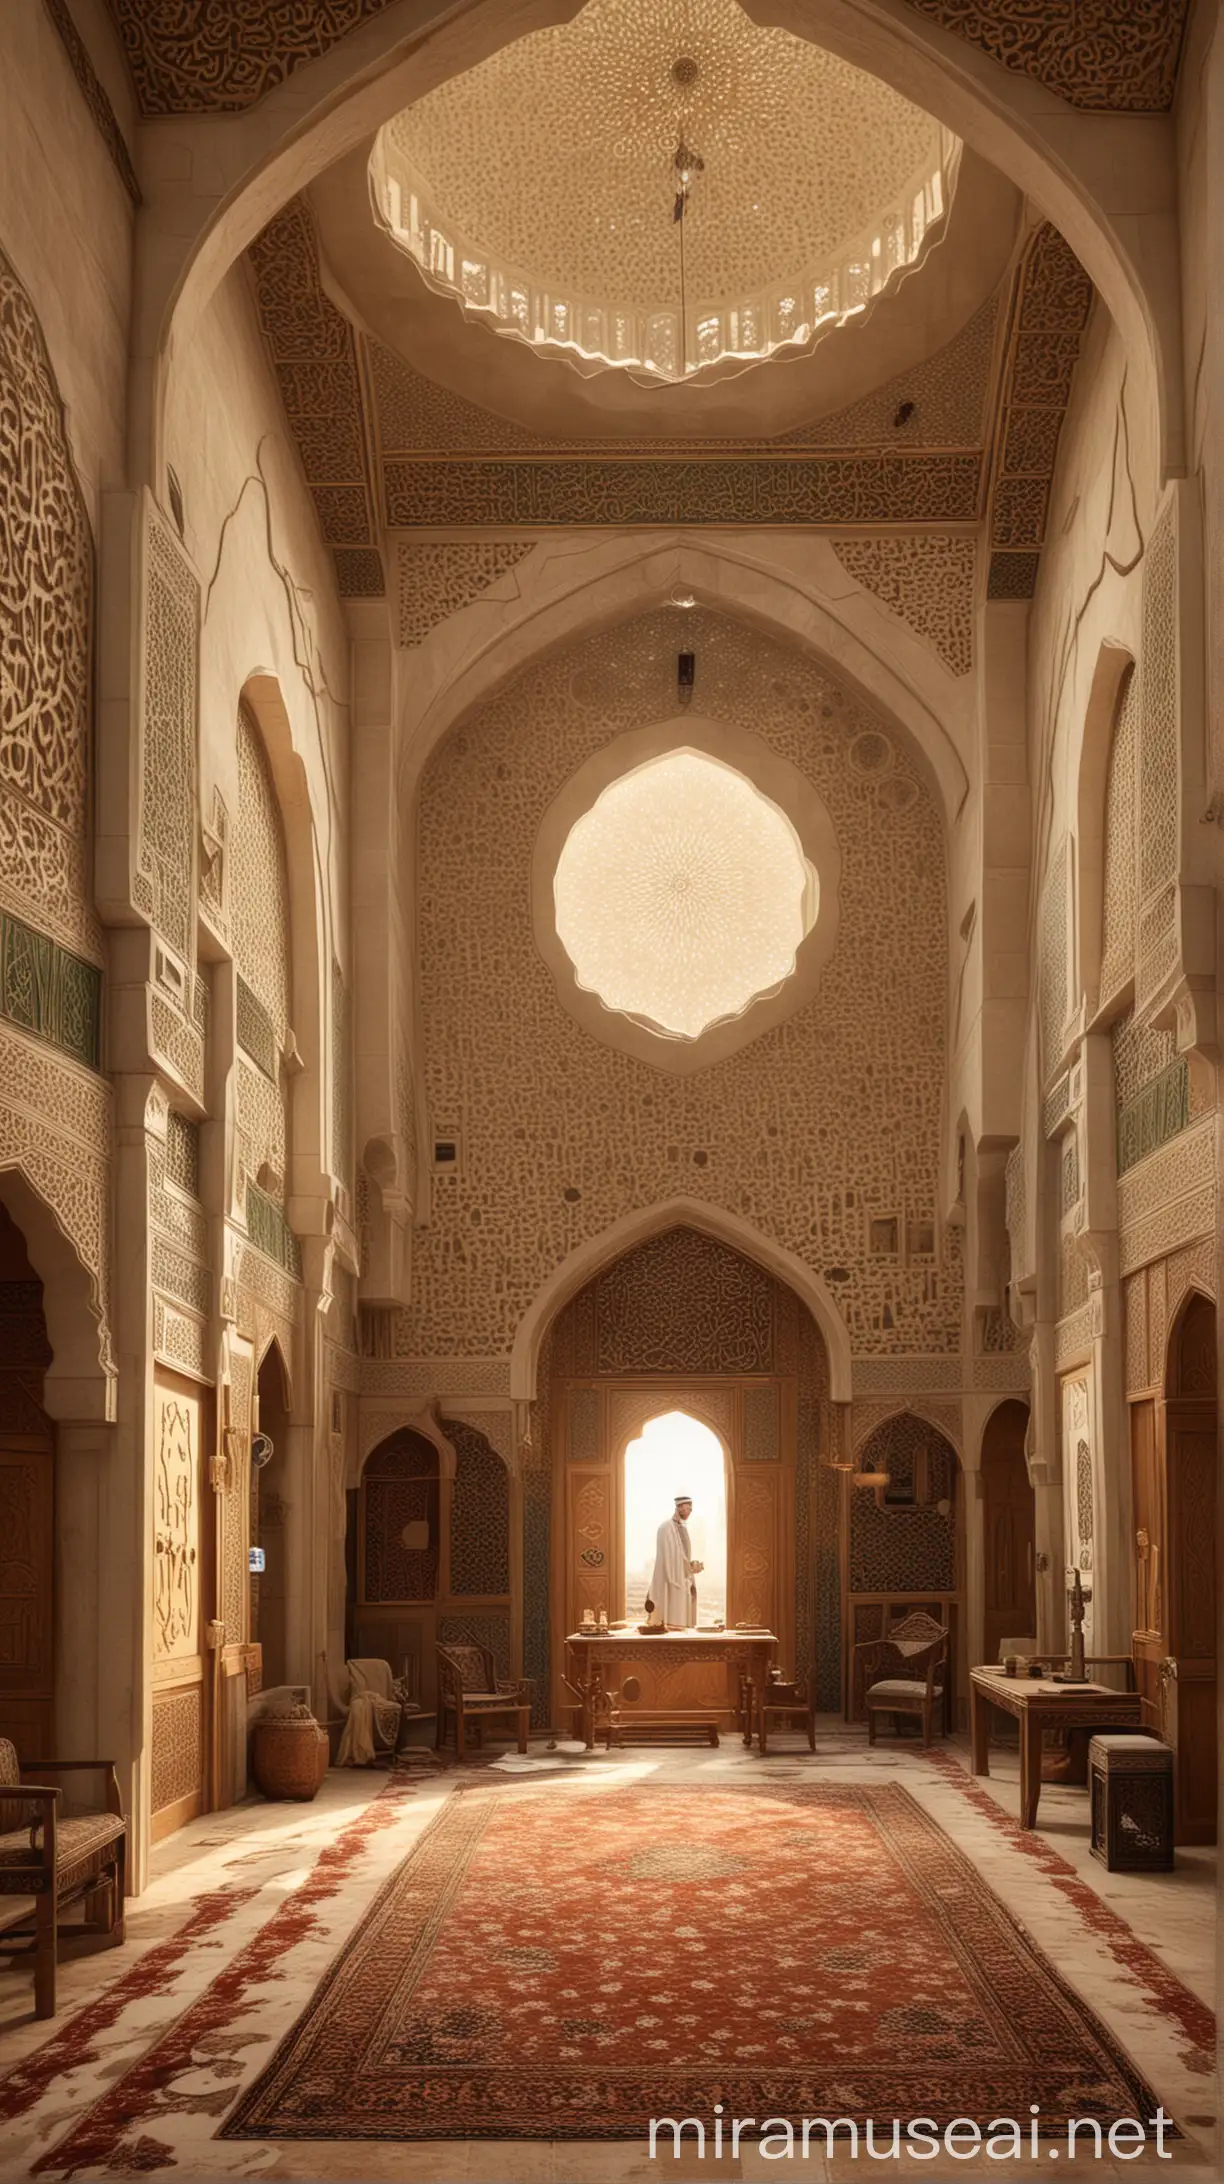 Dar alArqam Sacred Space for Islamic Learning and Community